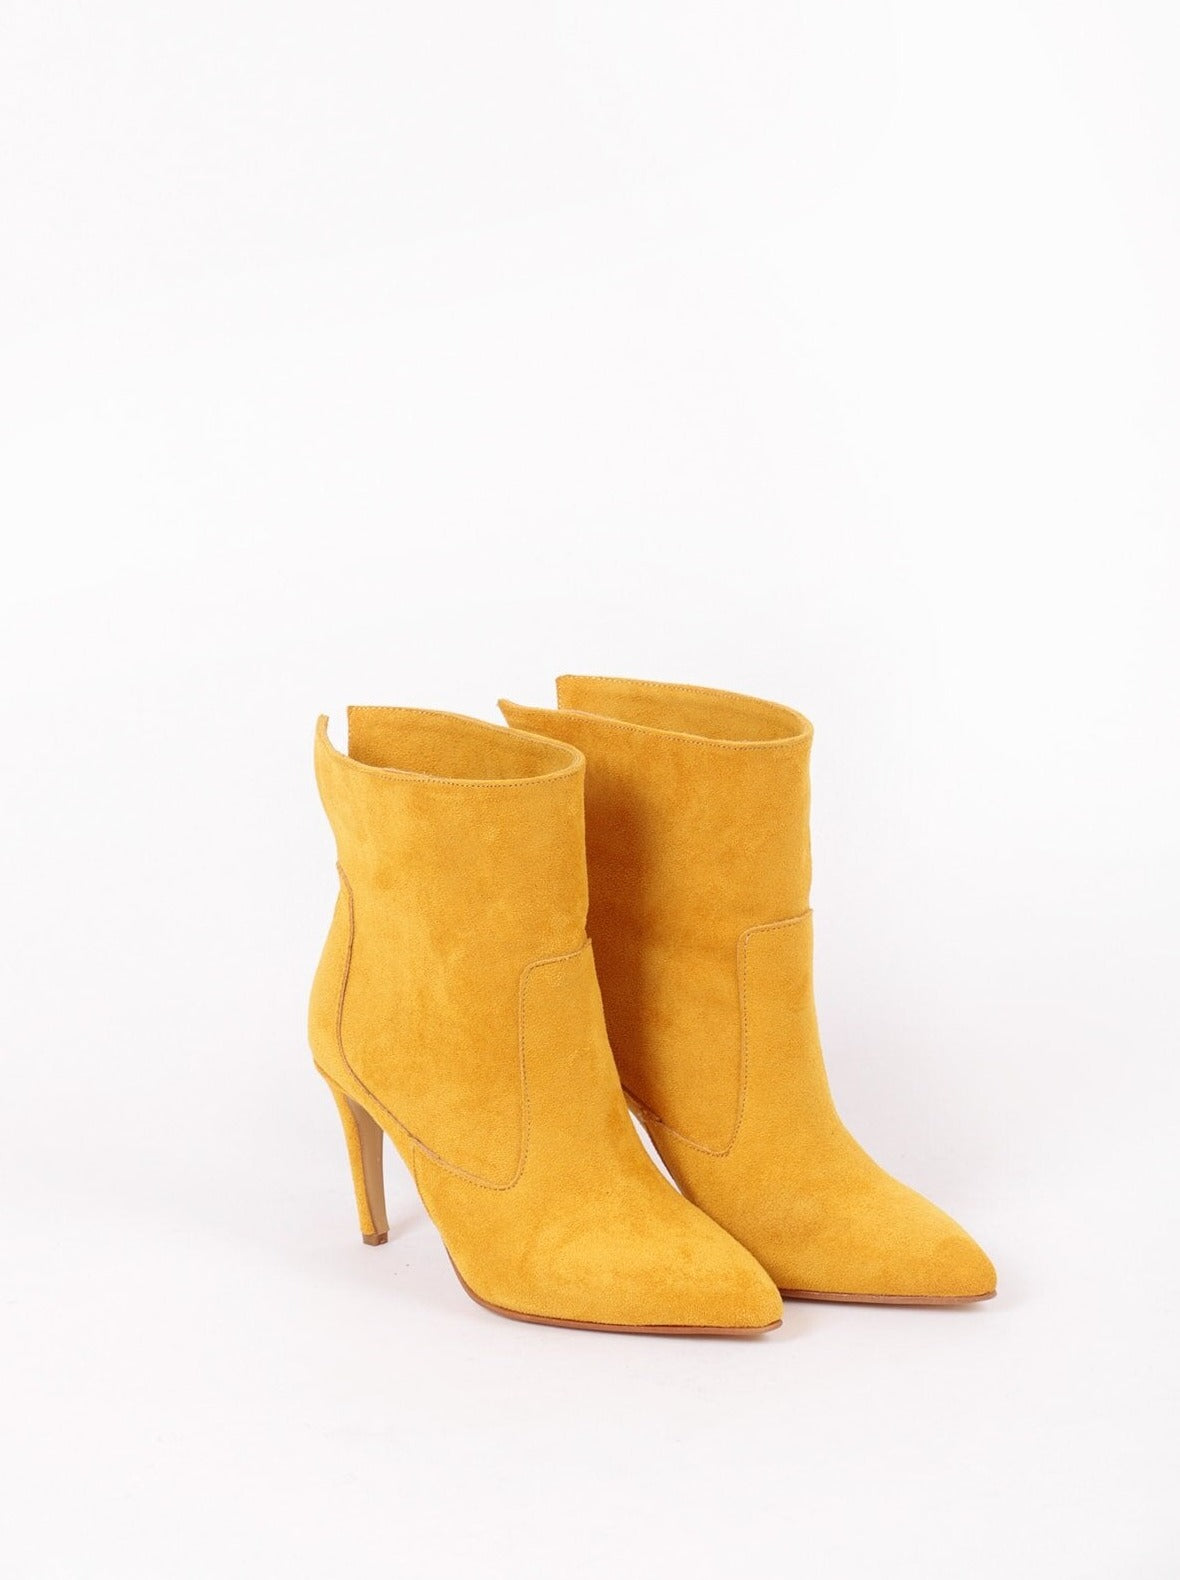 velma suede boots